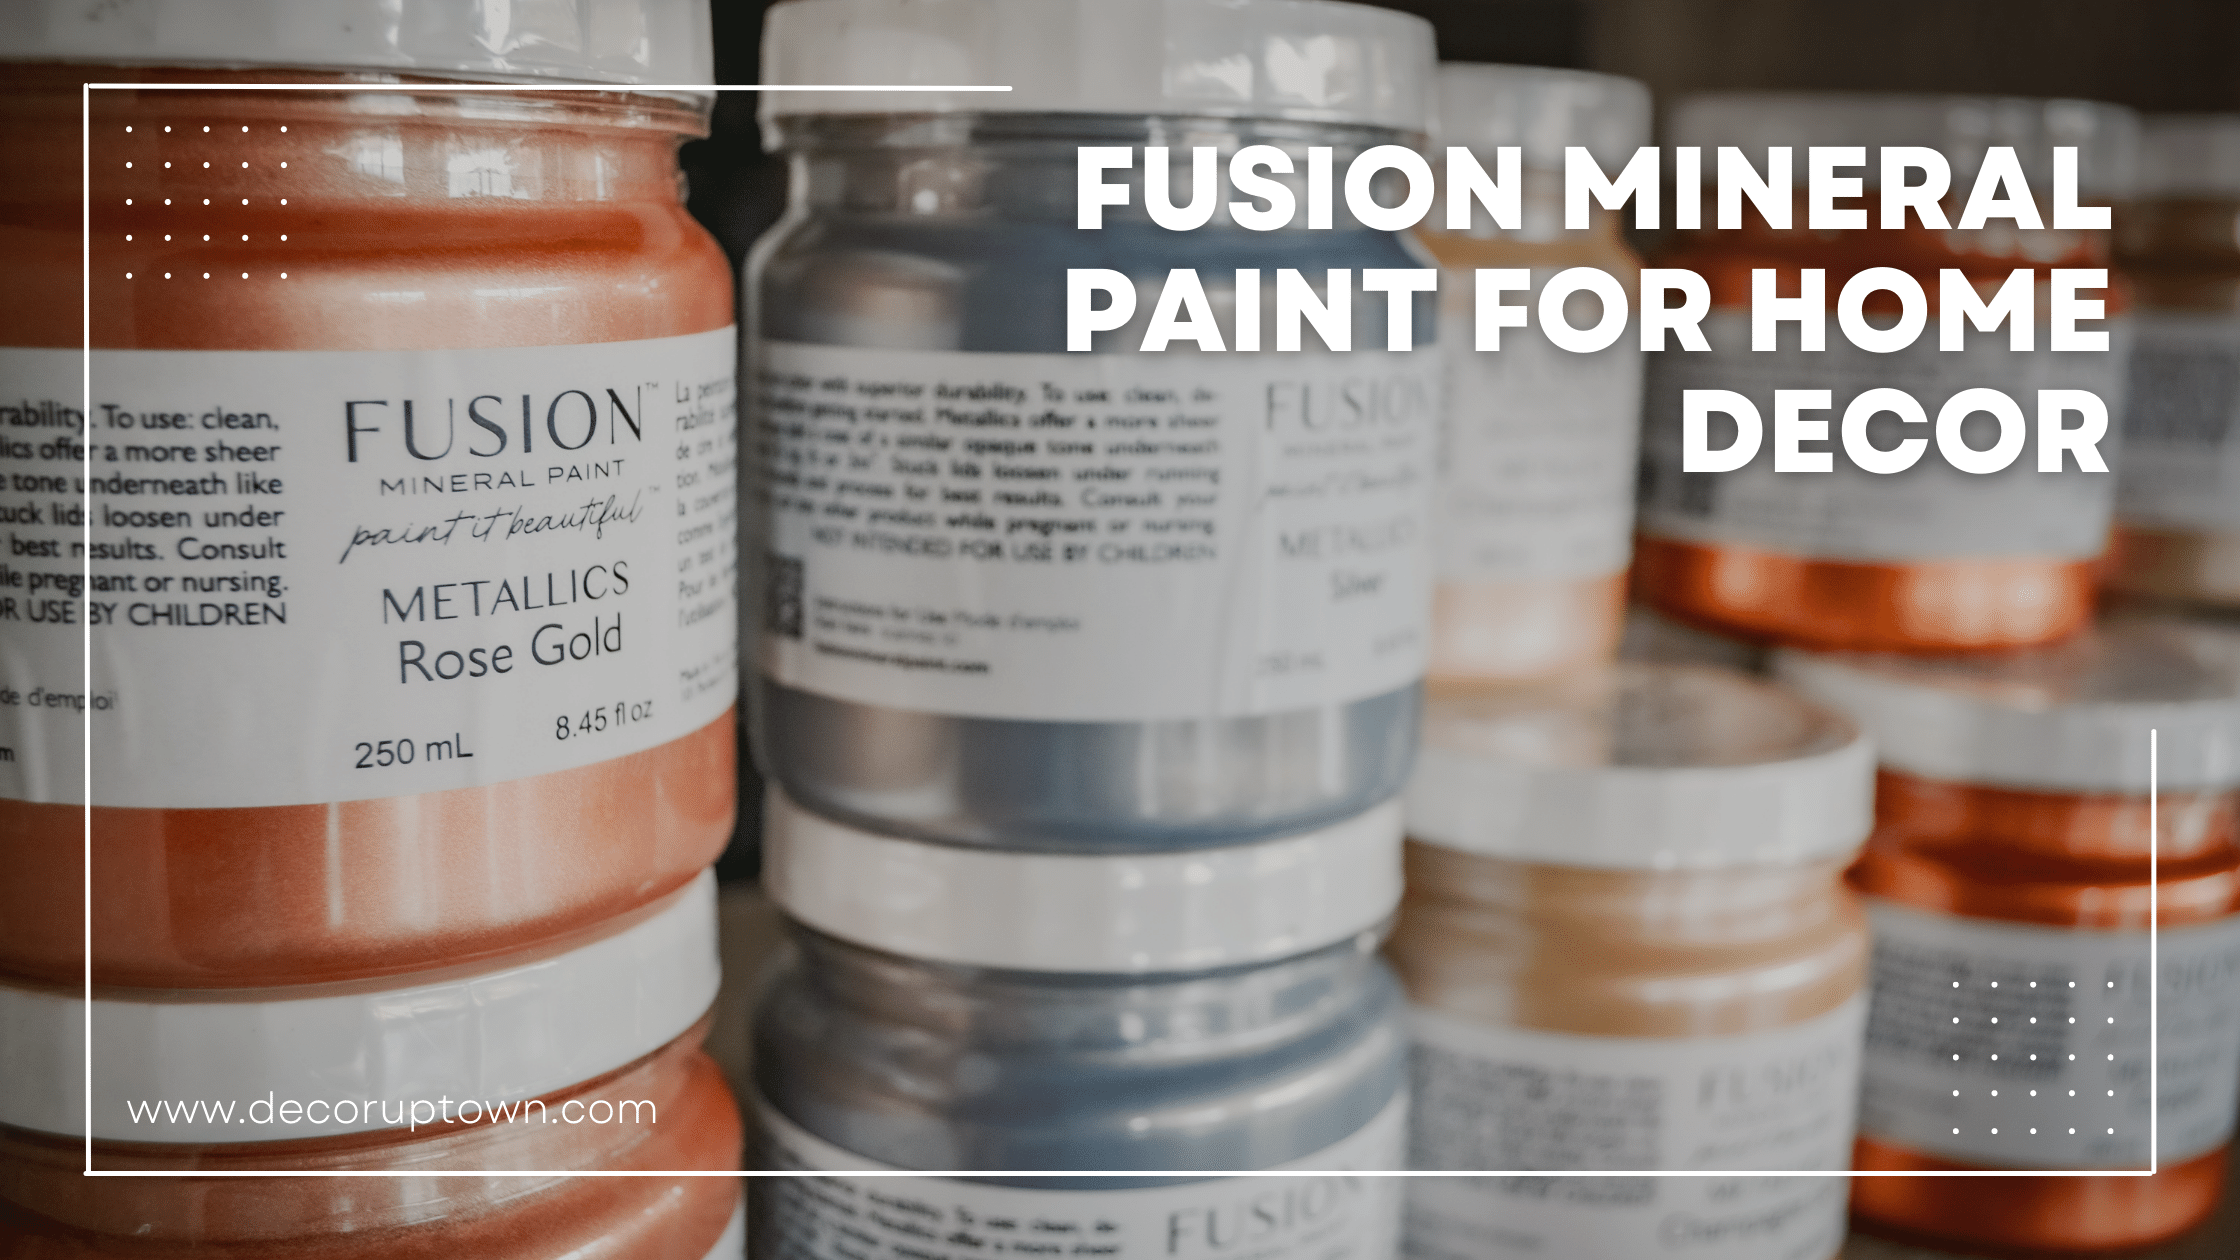 Fusion Mineral Paint For Home Decor